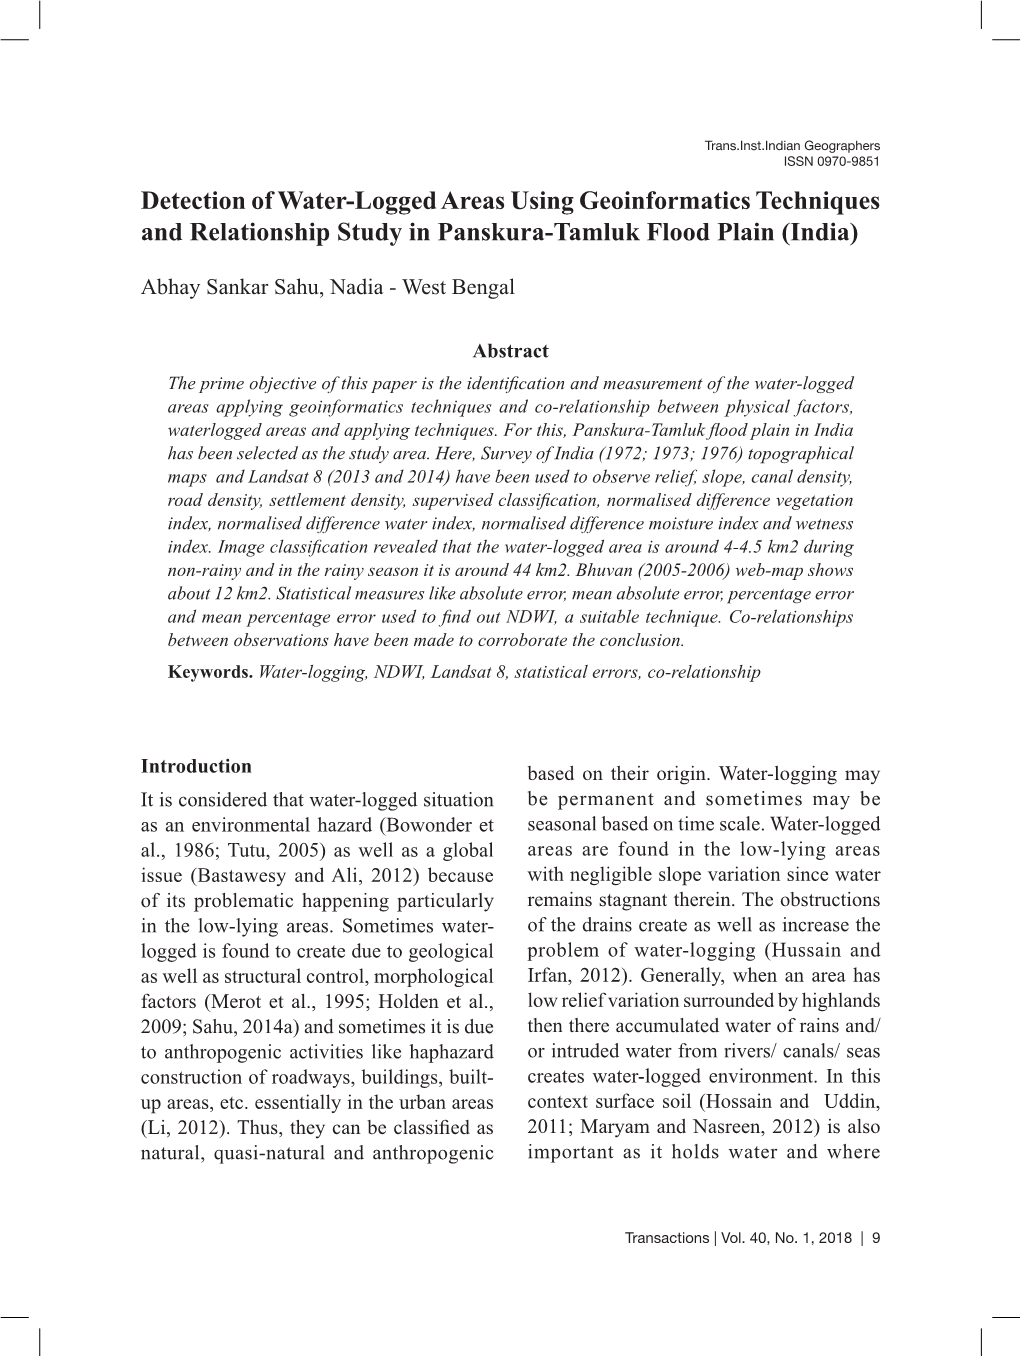 Detection of Water-Logged Areas Using Geoinformatics Techniques and Relationship Study in Panskura-Tamluk Flood Plain (India)